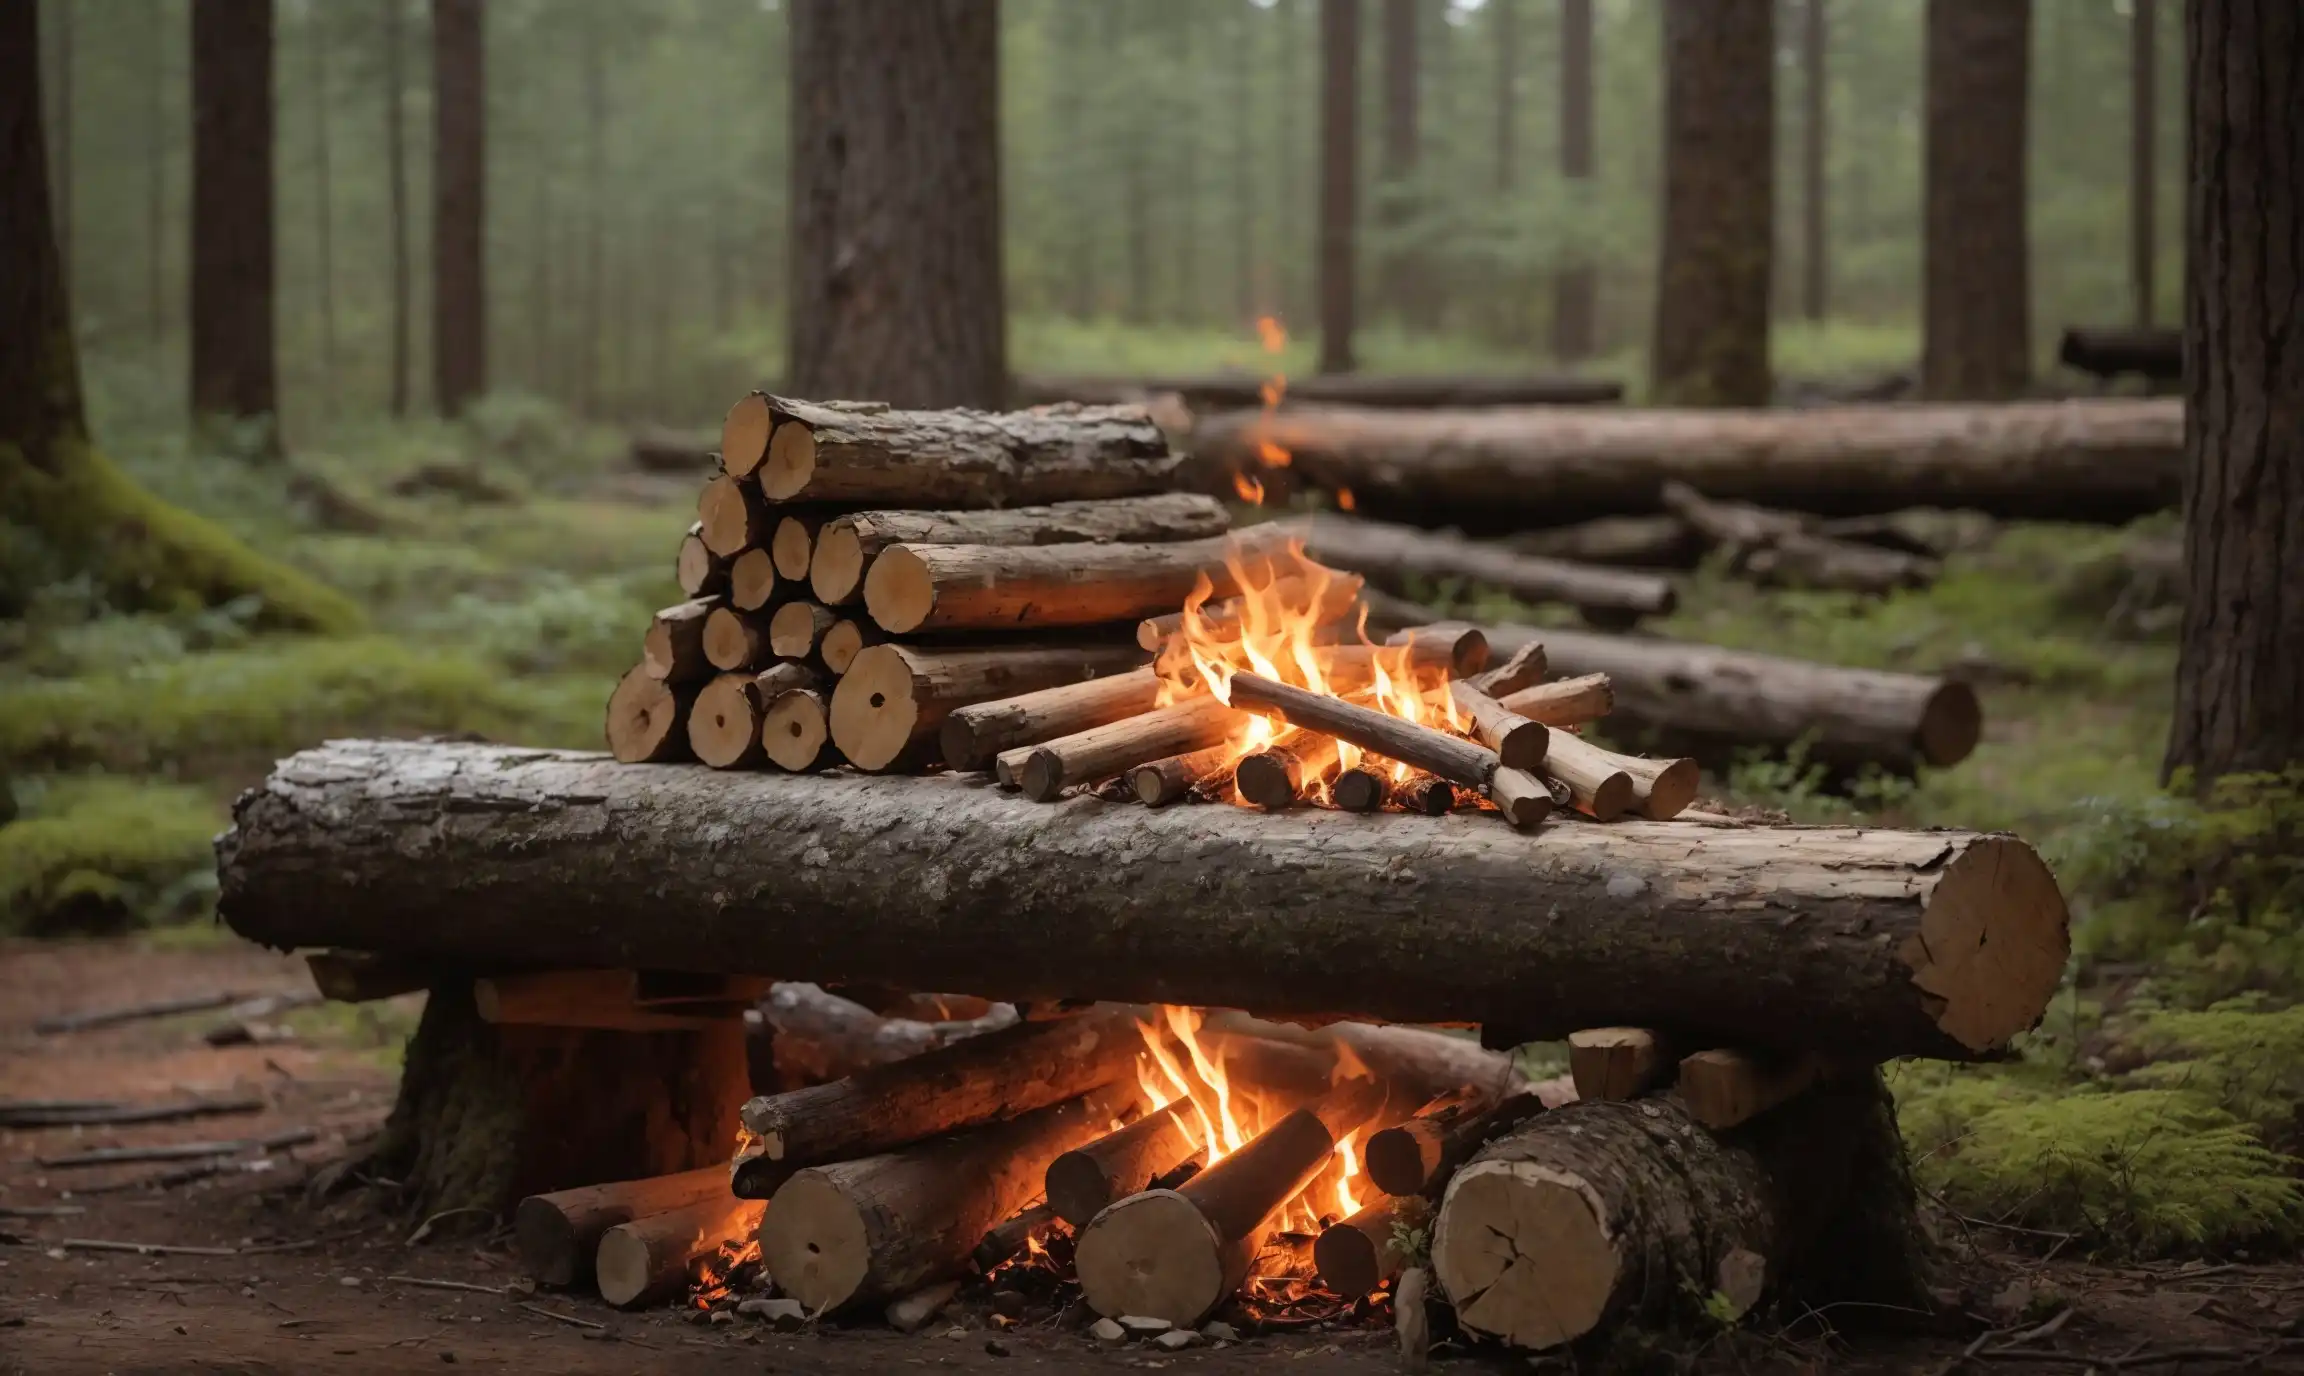 nestled deep within a pine forest with a small creek running by, towering pines with pinecones, firewood stacked neatly, and a rustic log bench